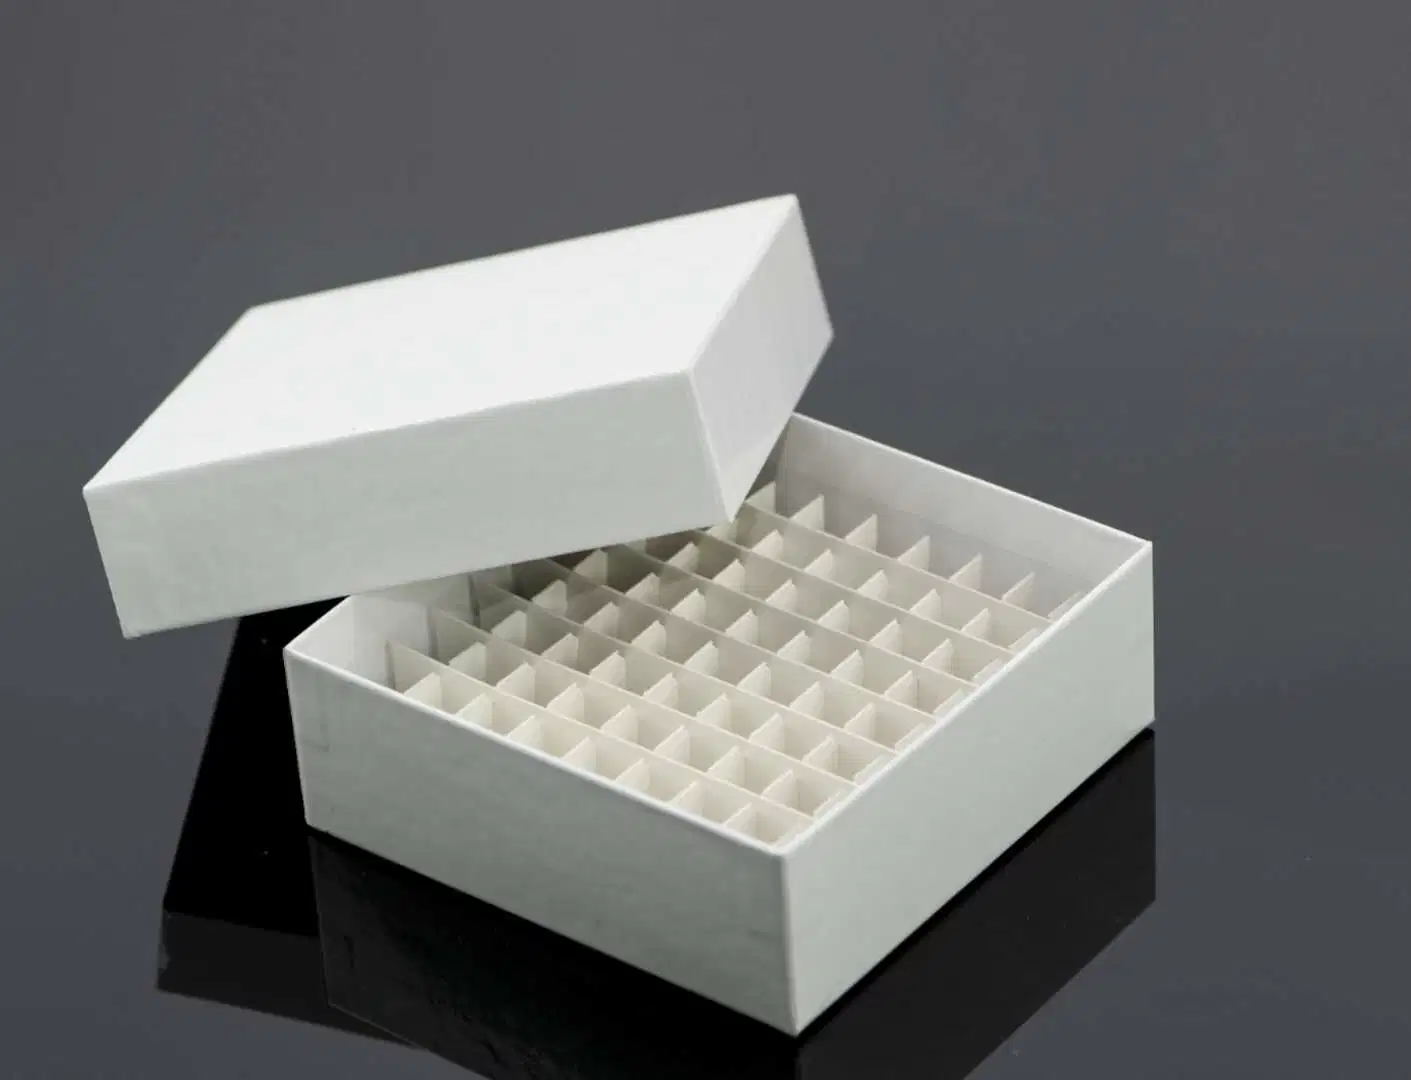 ID-Color Cardboard Freezer Boxes, with PP Dividers, 2 Inches, 81 Well, White, 5 PCS/Bag	10 Bags/Case. CE, ISO Certified.